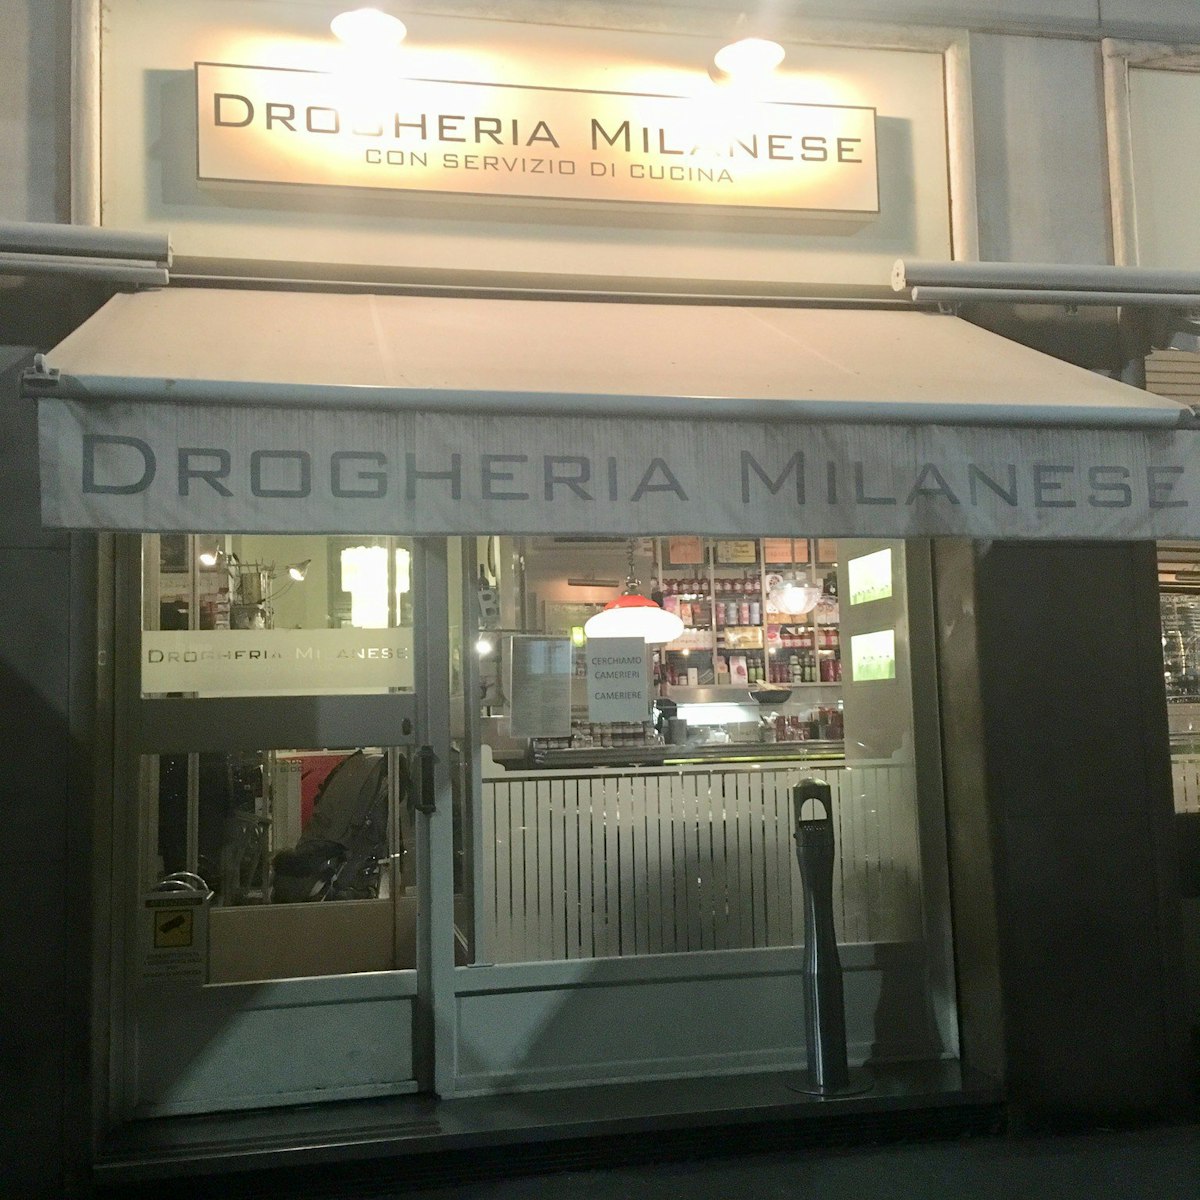 Entrance to Drogheria Milanese